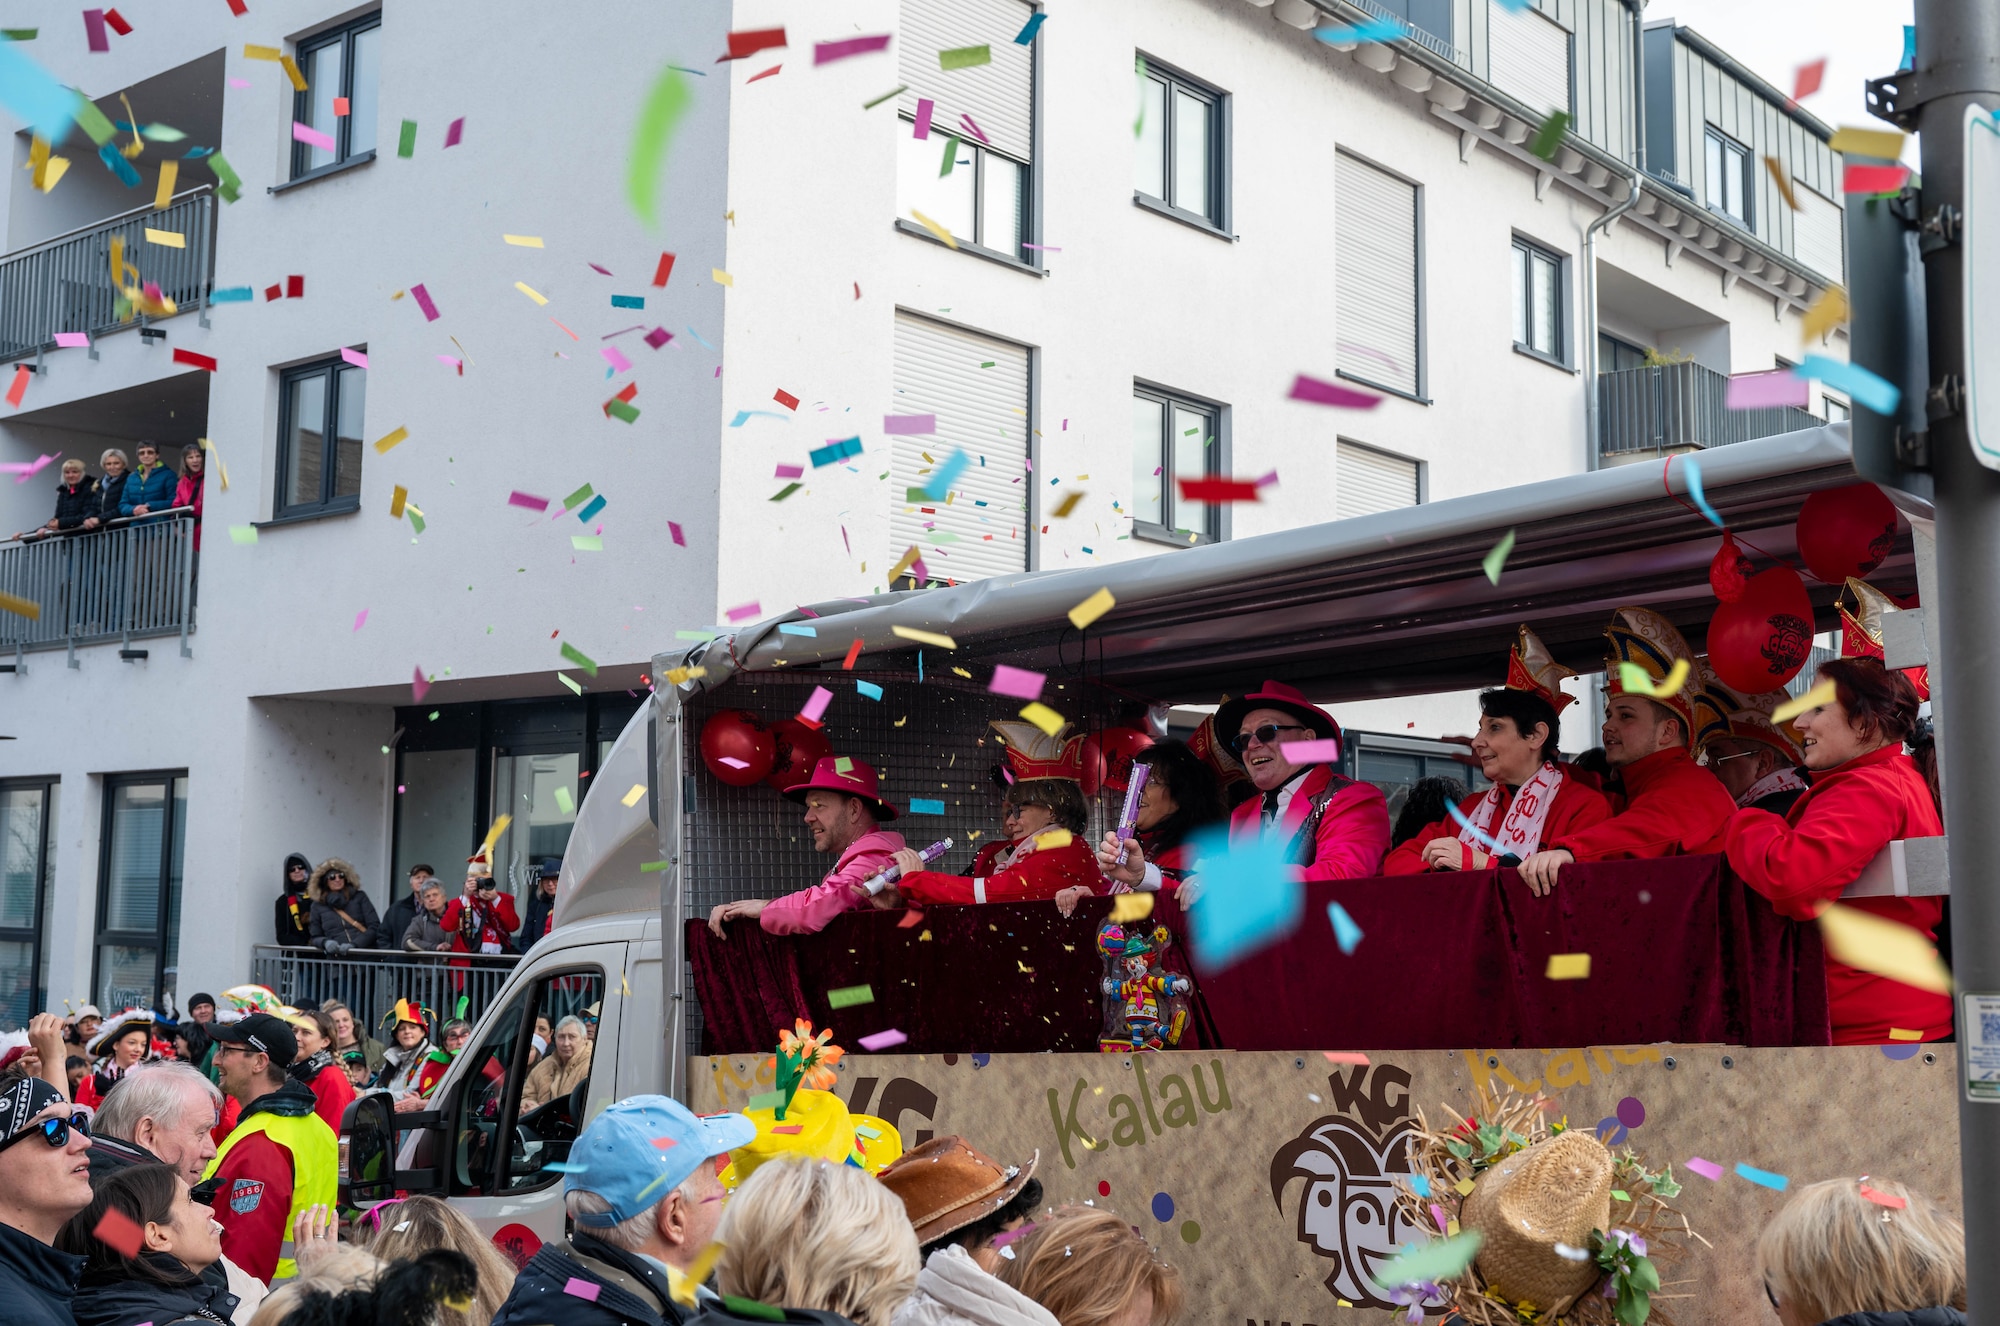 A van moves on street, confetti in air